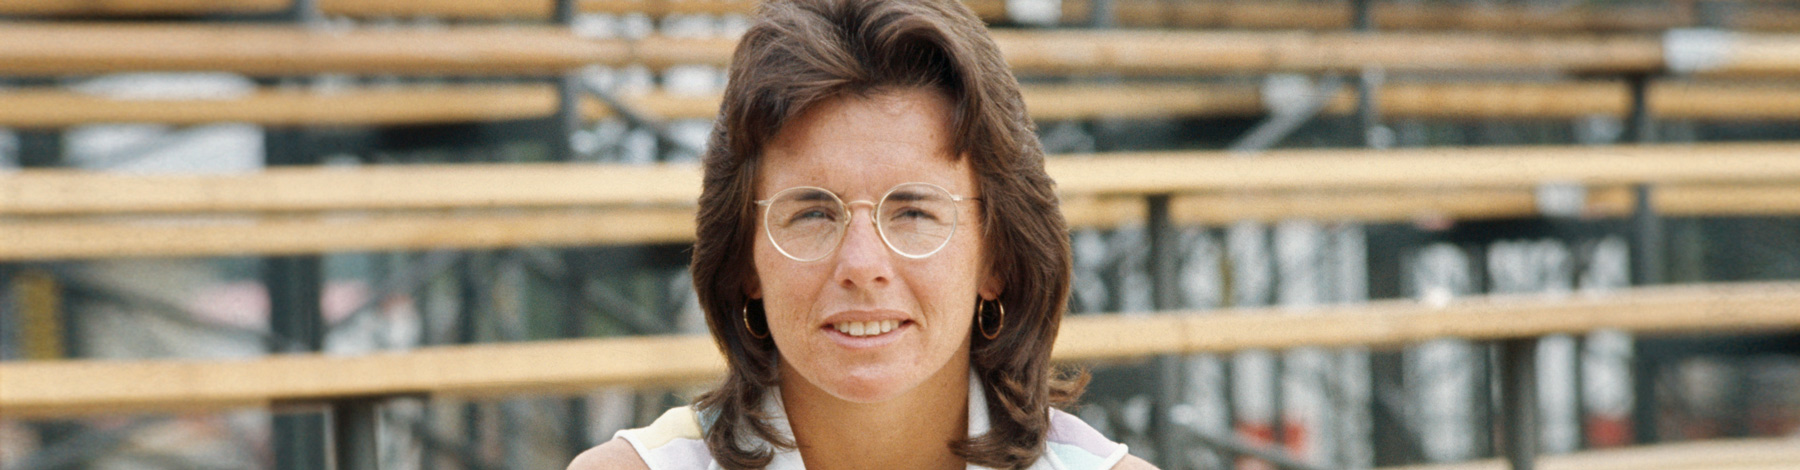 Bobby Riggs, Biography & Facts